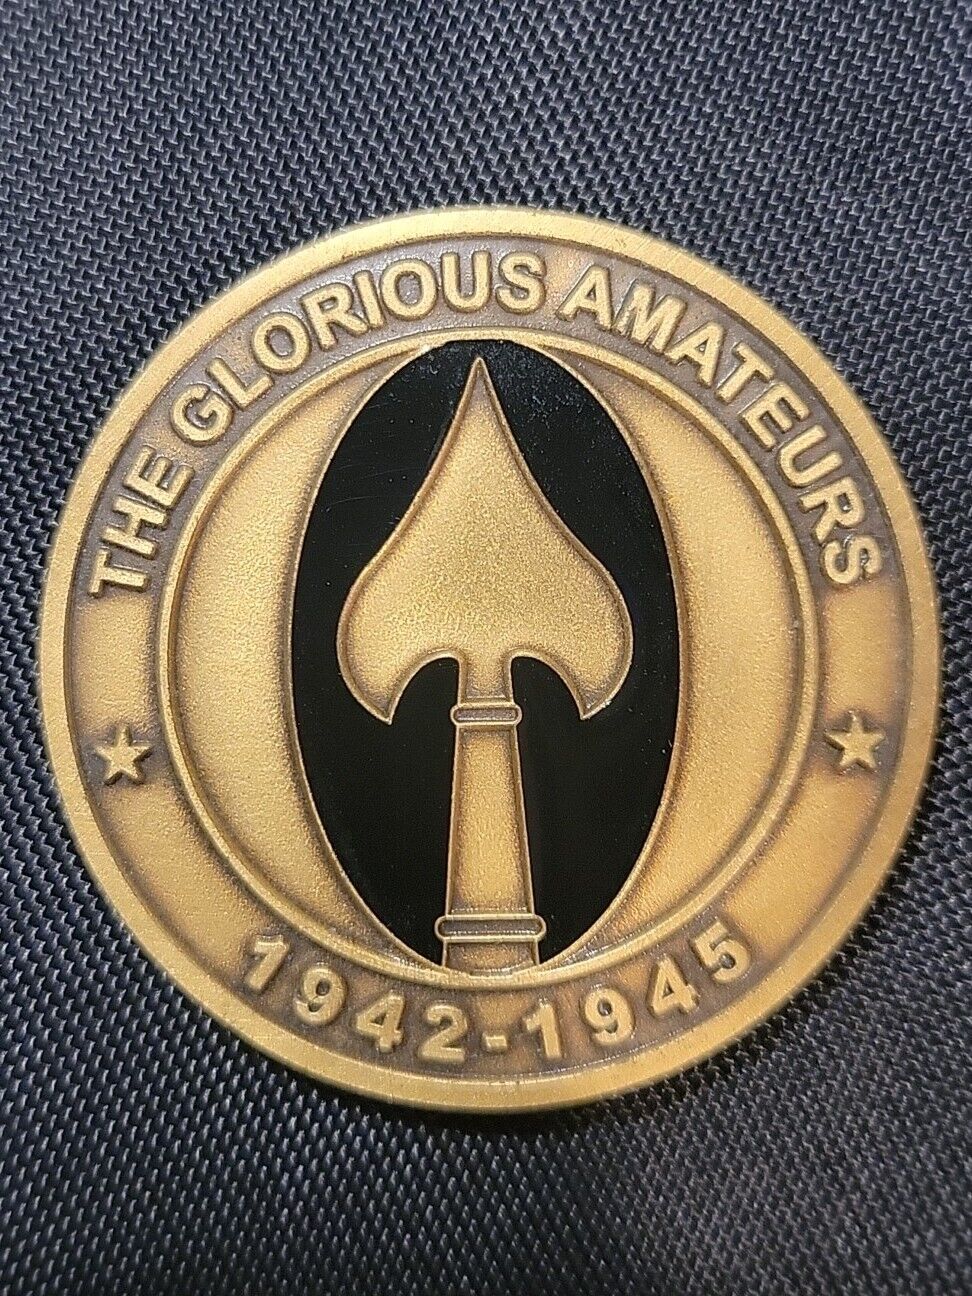 CIA OSS Glorious Amateurs Office of Strategic Services WWII Spear Challenge Coin